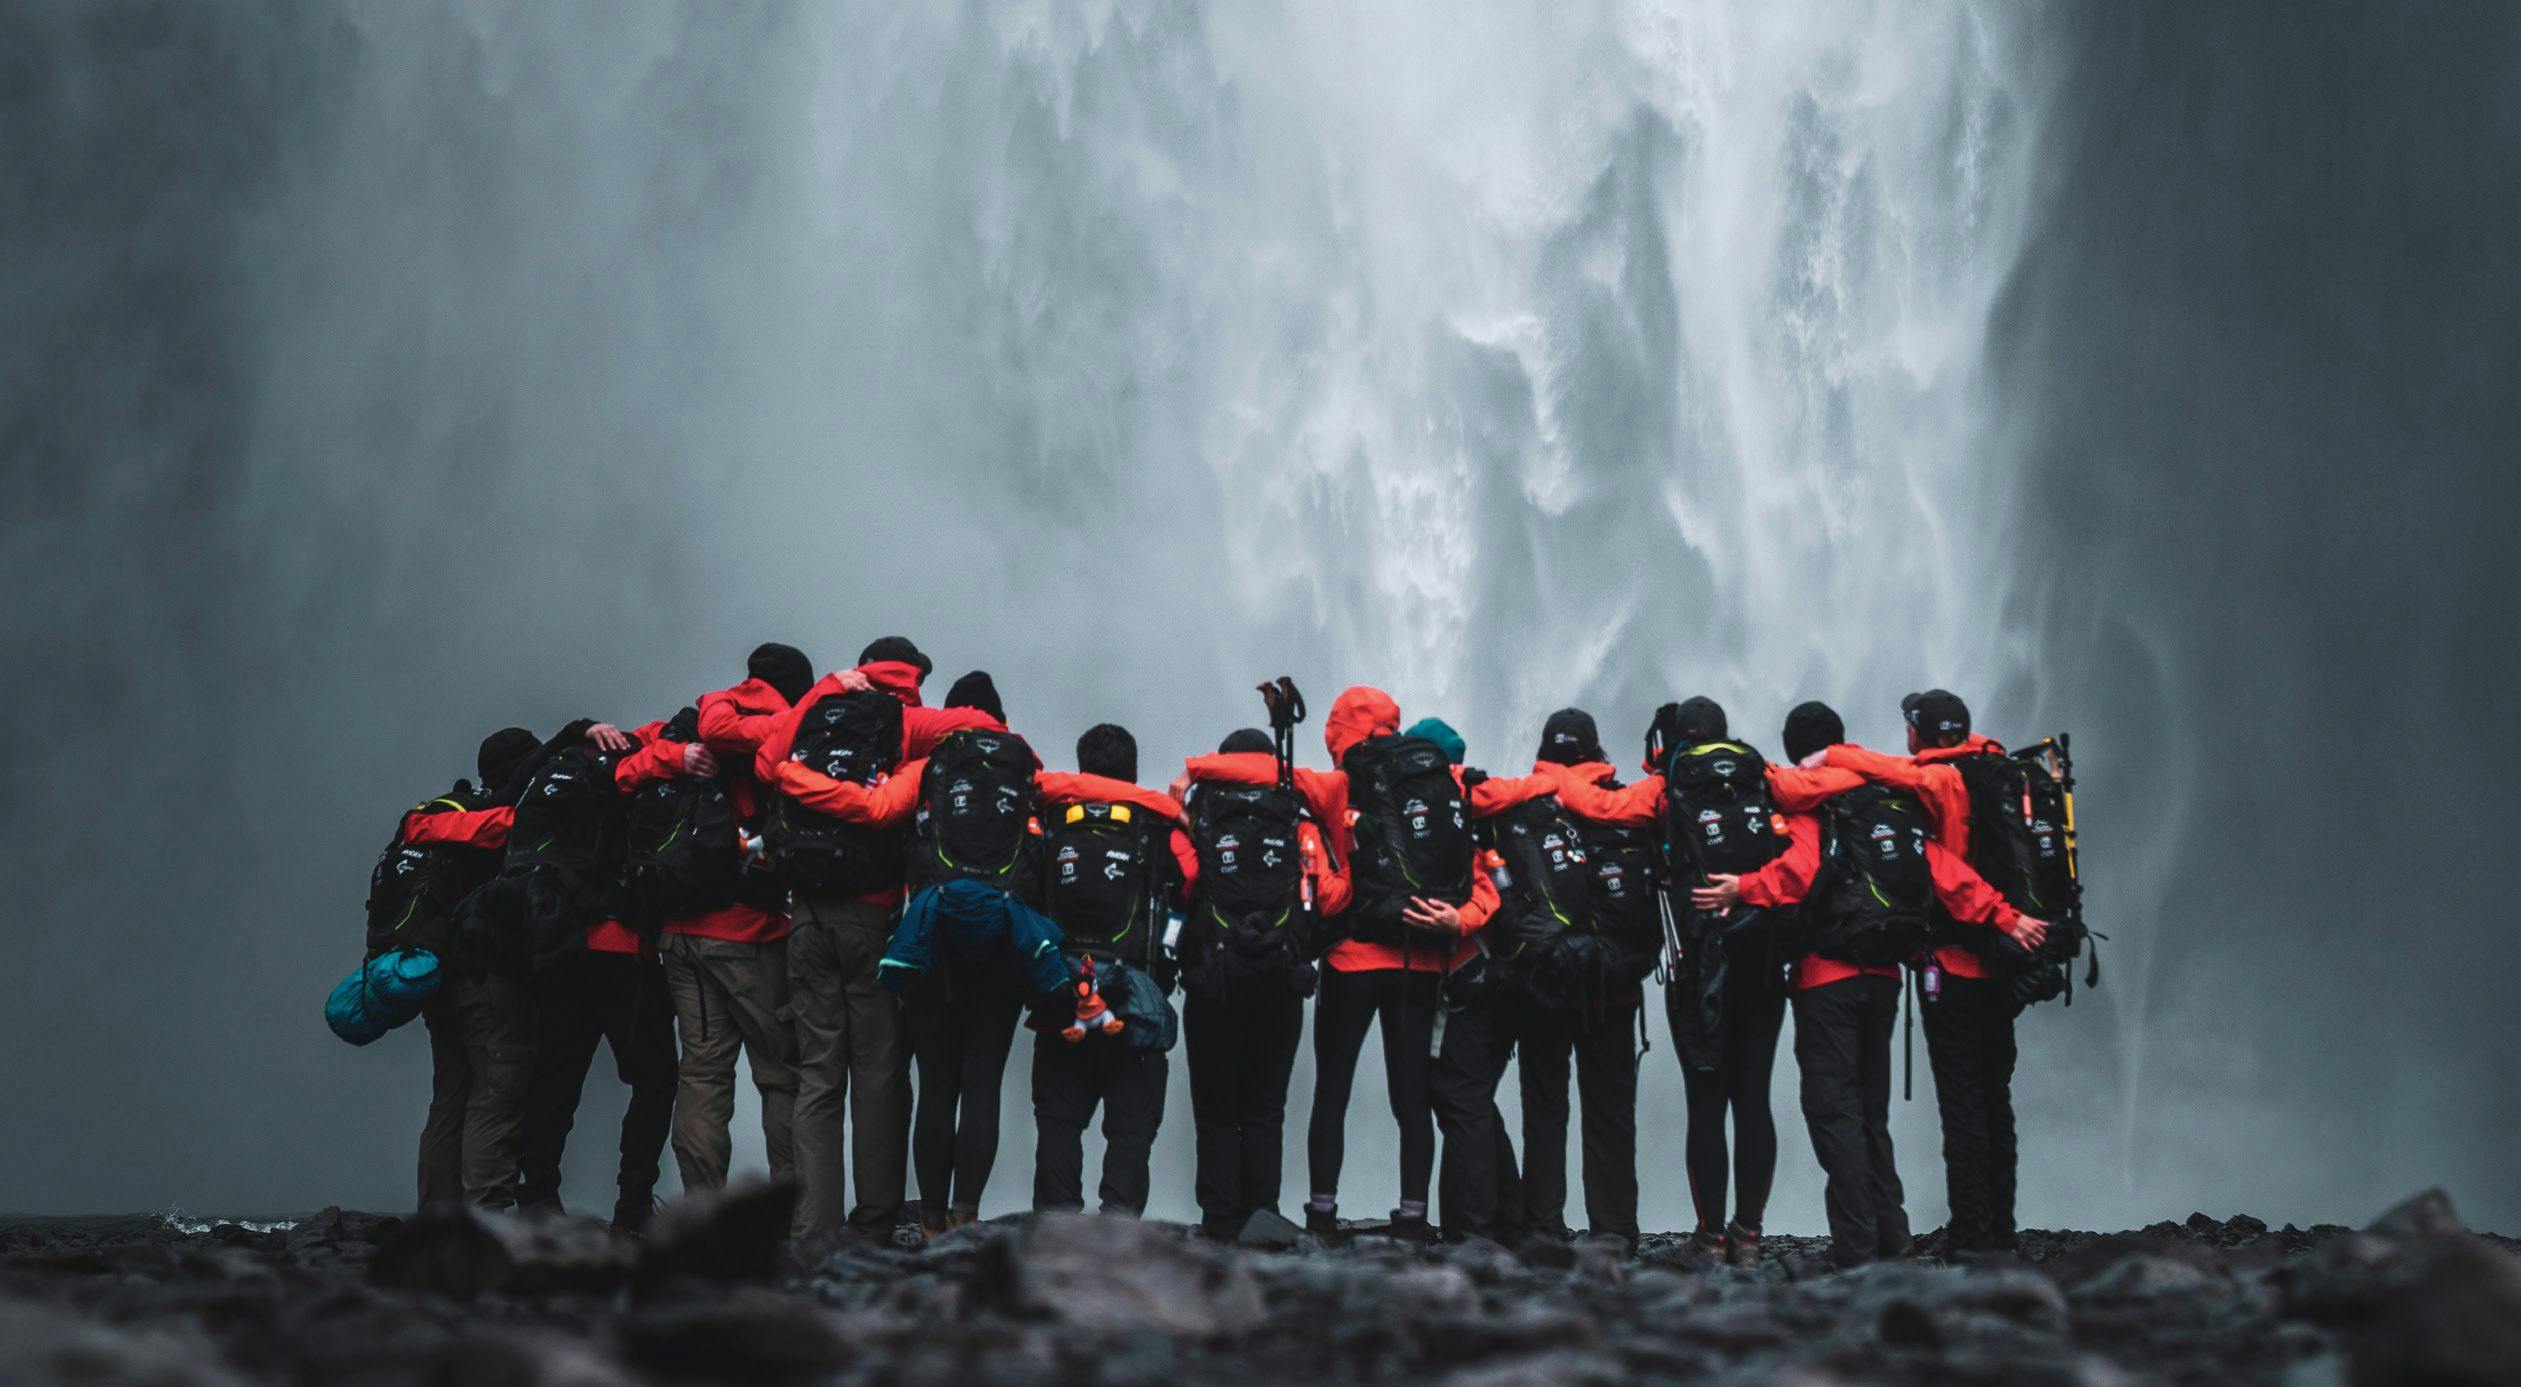 The team trekked to
Skogafoss Waterfall
on day four of the
adventure. - PHOTO BY UNCAGE THE SOUL PRODUCTIONS